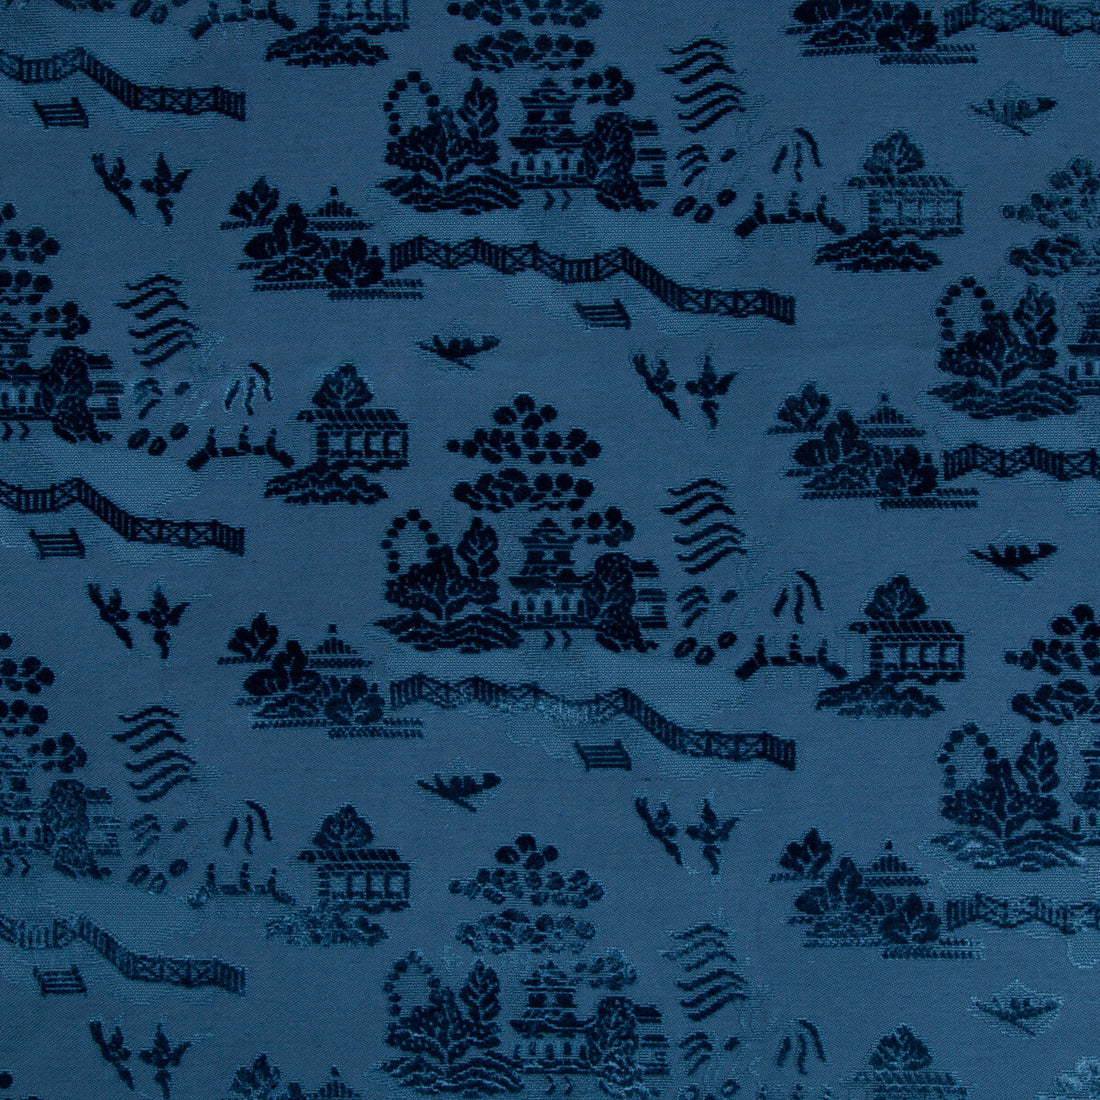 La Pagode Velvet fabric in navy color - pattern 8017129.50.0 - by Brunschwig &amp; Fils in the Les Ensembliers collection